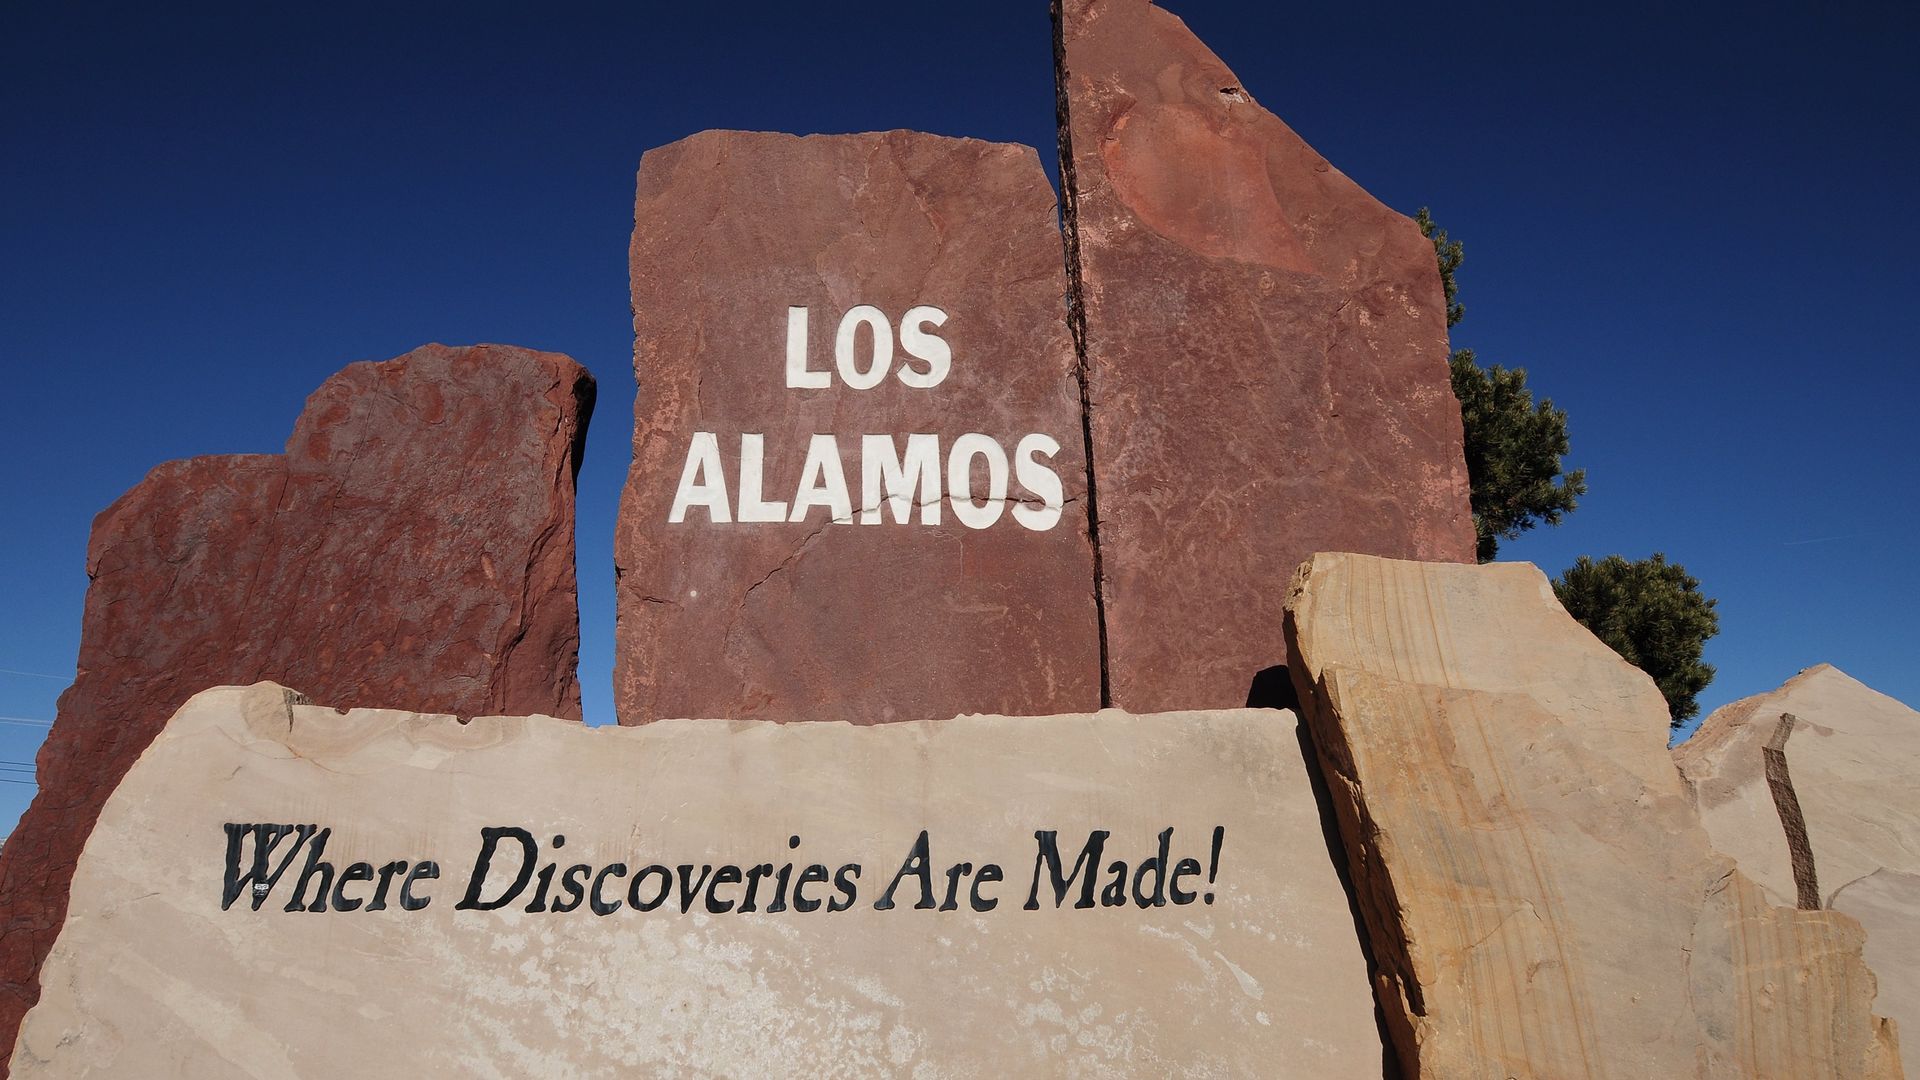 A stone sign welcomes motorists to Los Alamos, New Mexico, home to the Los Alamos National Laboratory established in 1943 as part of the Manhattan Project.